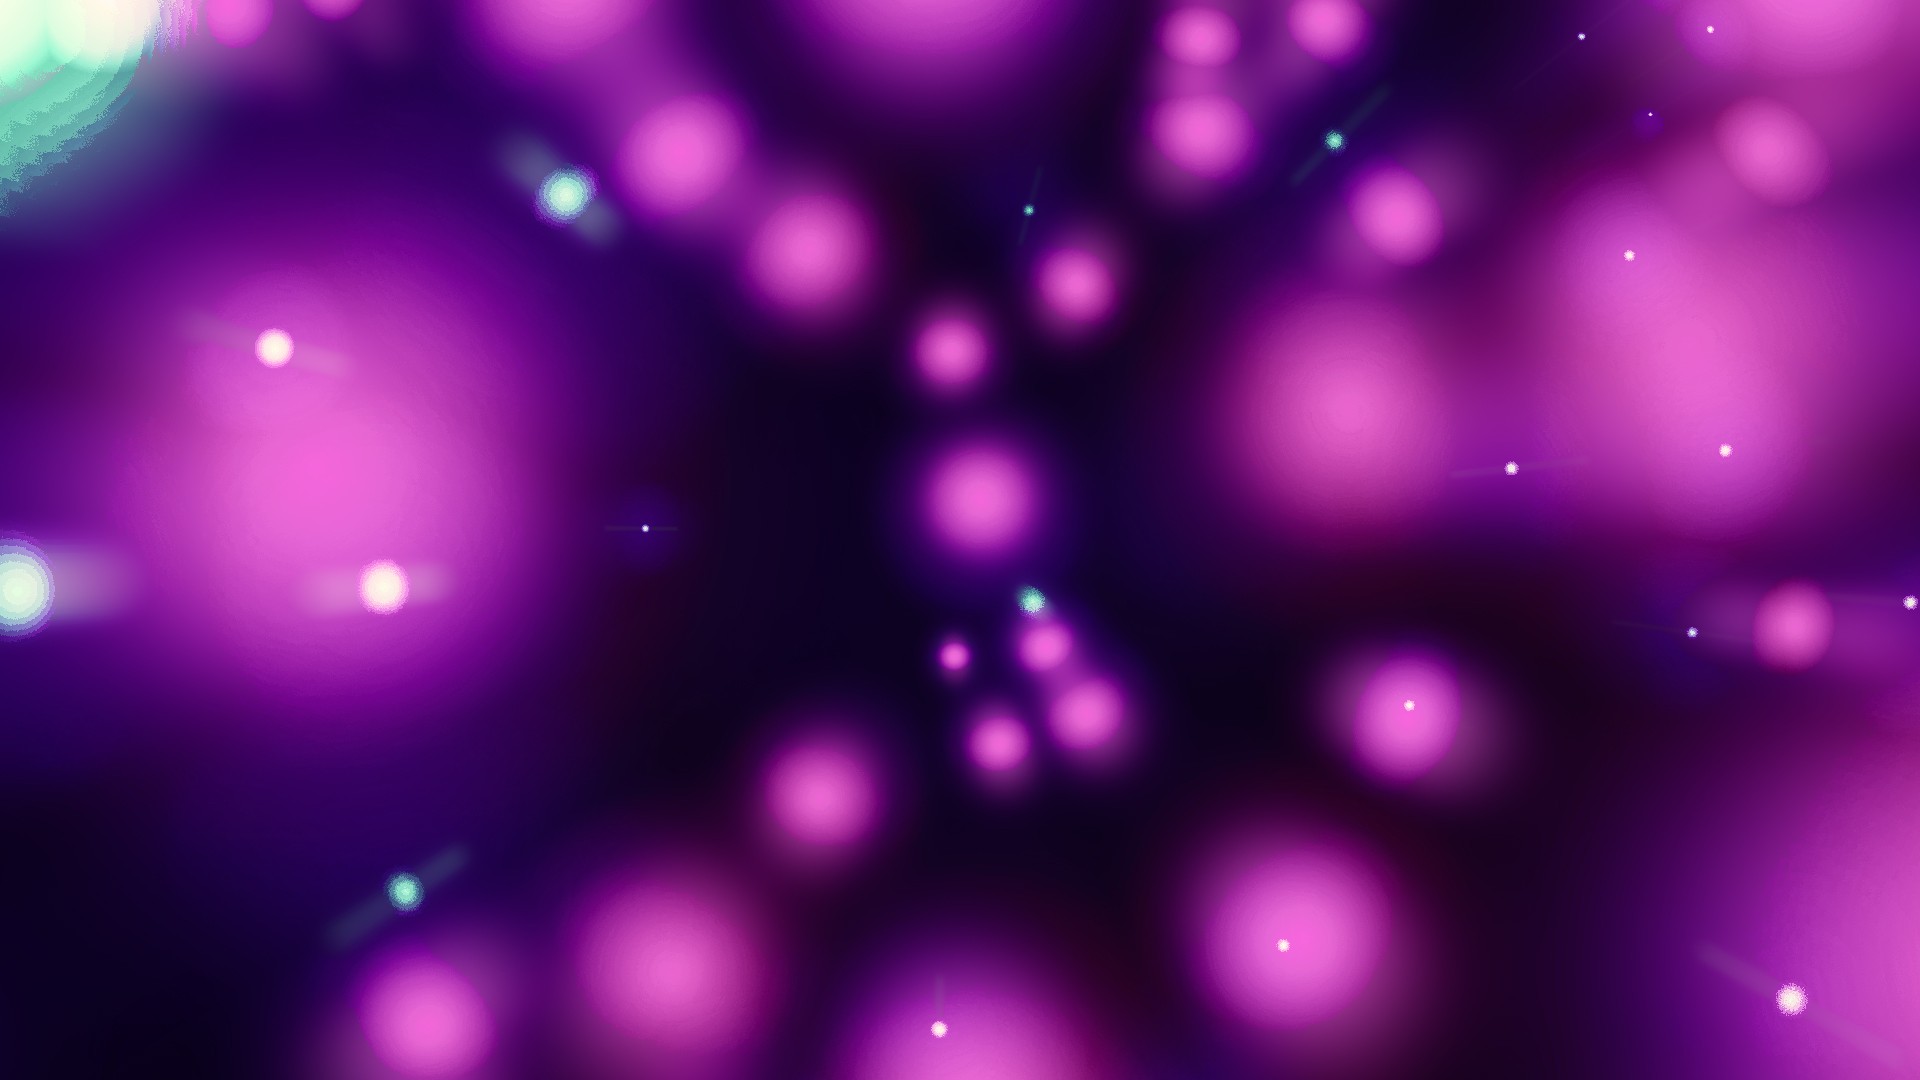 outer, Space, Multicolor, Atom, Digital, Art, Artwork, Particles, Speed, Flowing Wallpaper